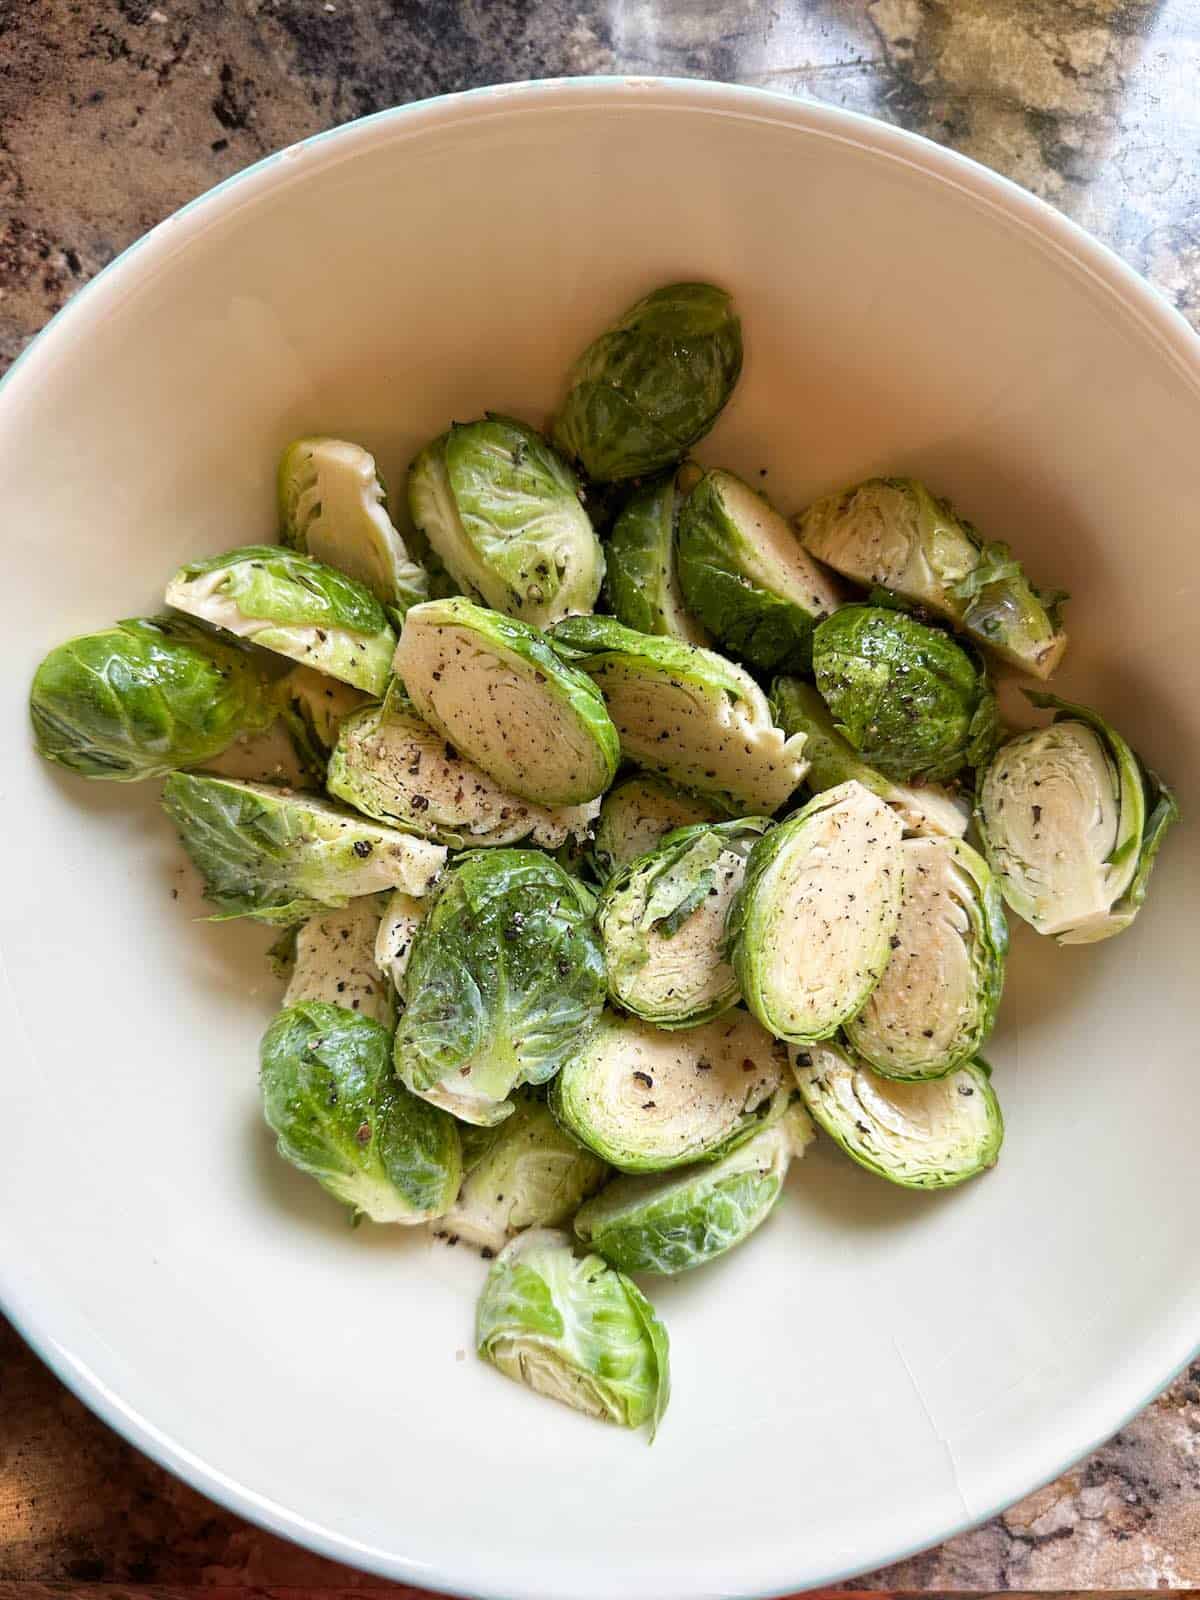 Brussels sprouts tossed in extra virgin olive oil, salt and pepper in a bowl.